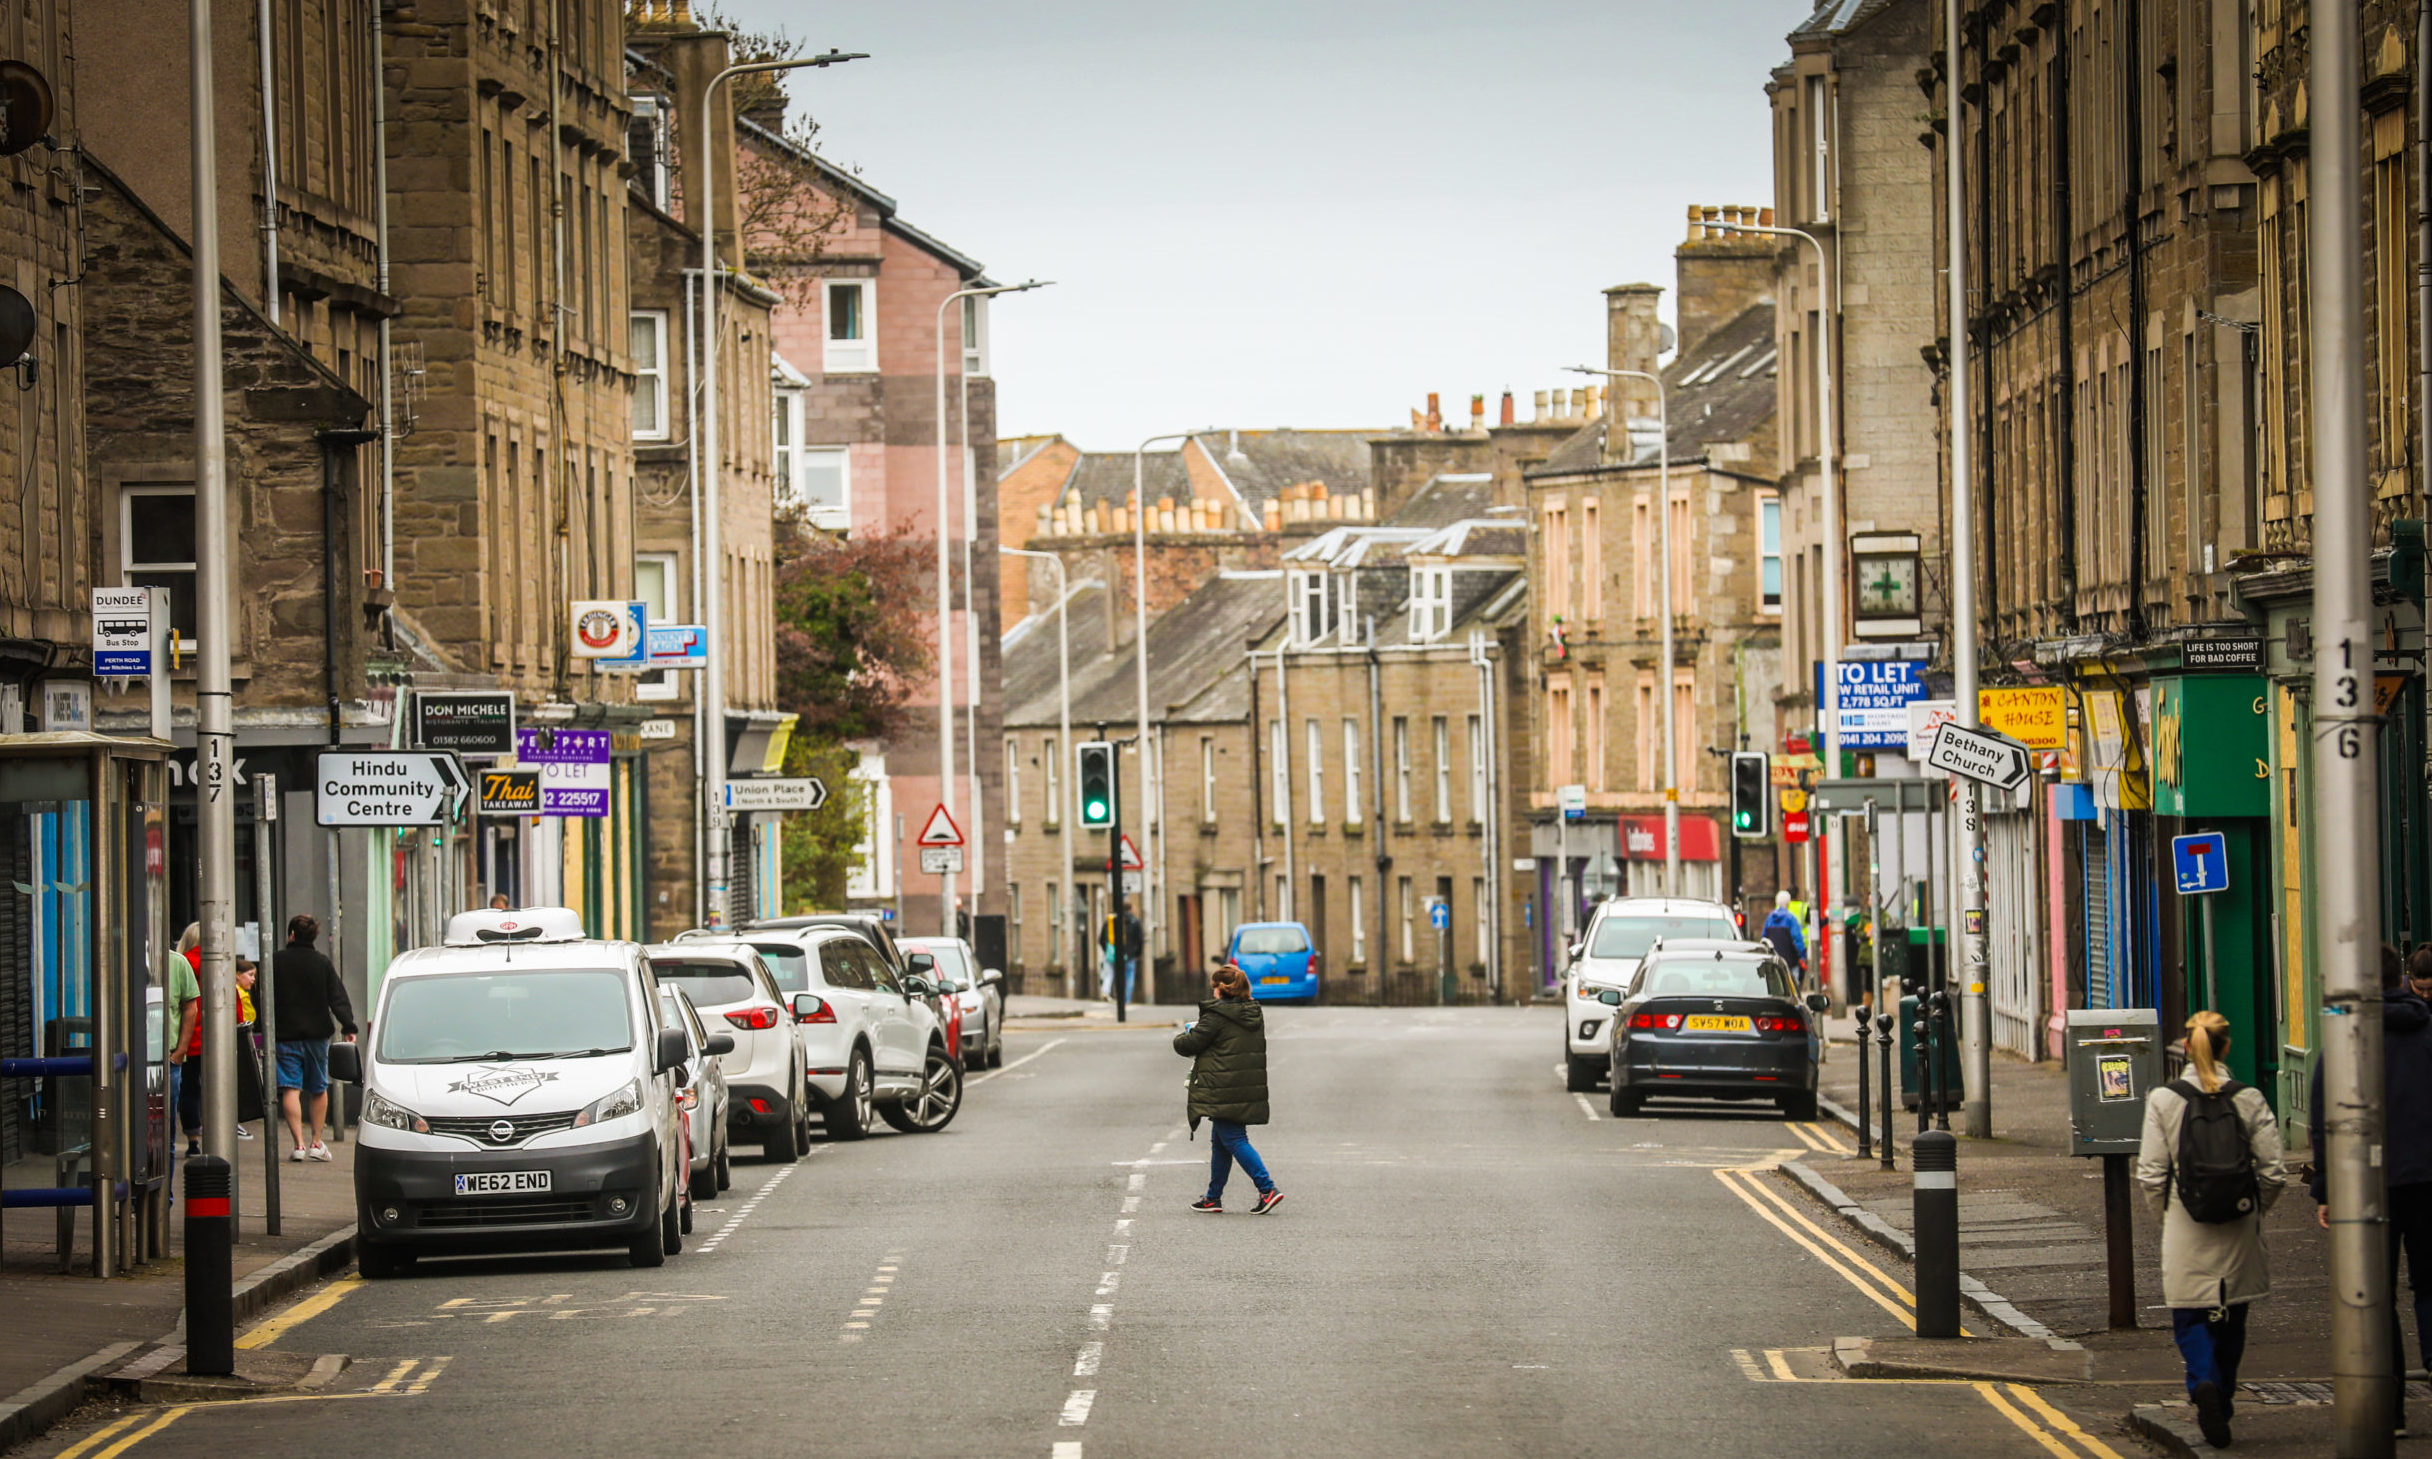 Perth Road in Dundee during the lockdown. The area has seen 14 Covid-19 deaths.